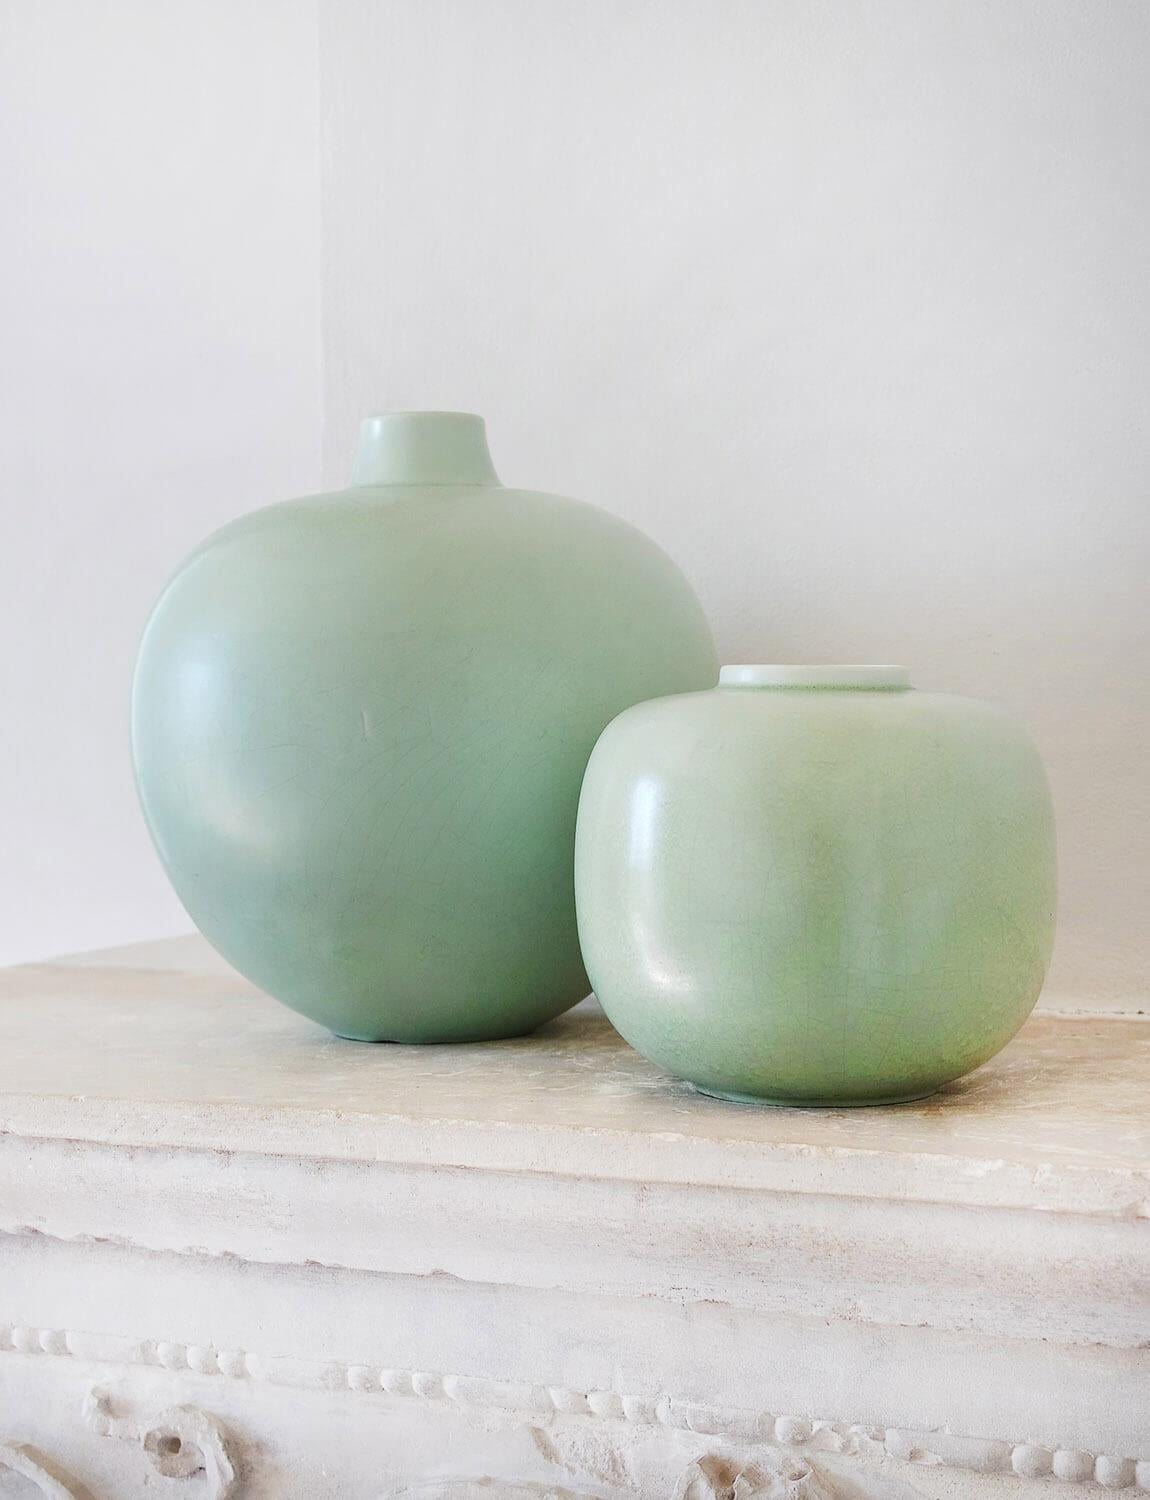 These spectacular celadon vases were designed by Guido Andlovitz for the ceramics house, Società Ceramica Italiana, Lavenia where he was the Art Director in the 1930s. Guido Andlovitz (1900-1971) was a renowned Italian ceramicist whose work is